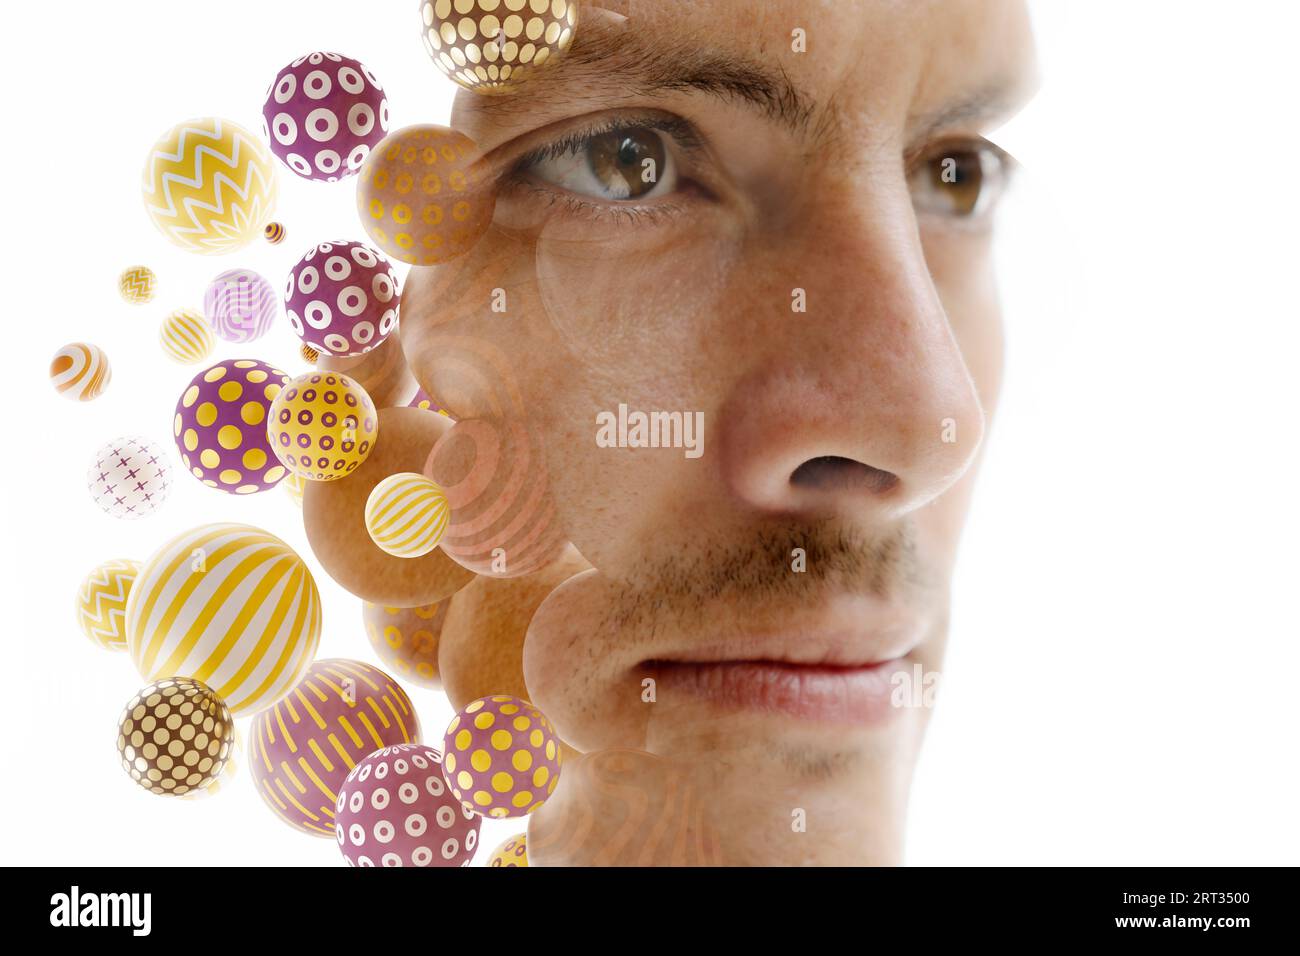 A double exposure male portrait combined with 3D spheres on white background Stock Photo